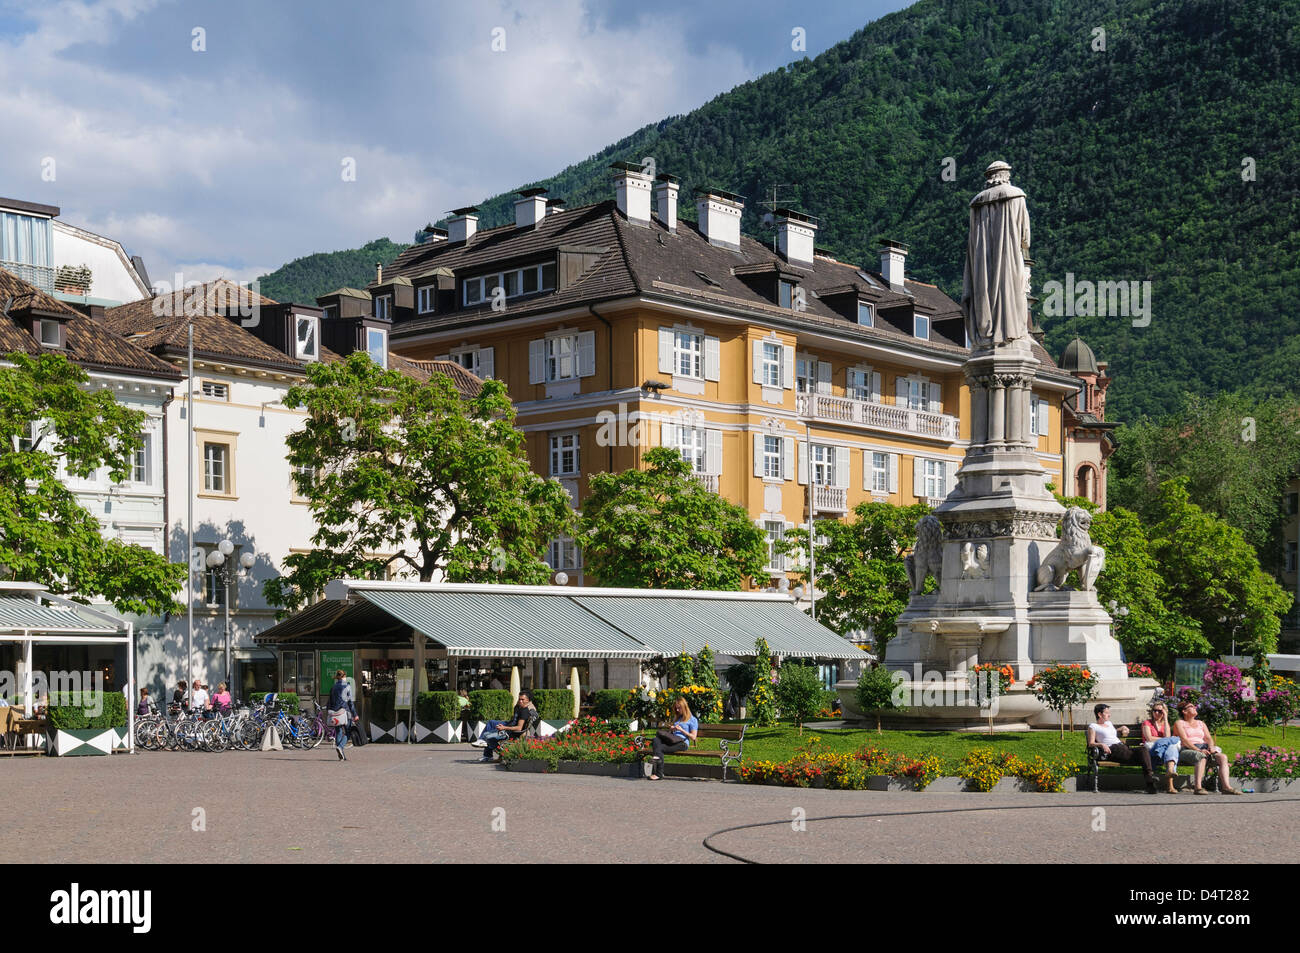 Bolzano, Italy. Piazza Walther. Walther Square. Stock Photo